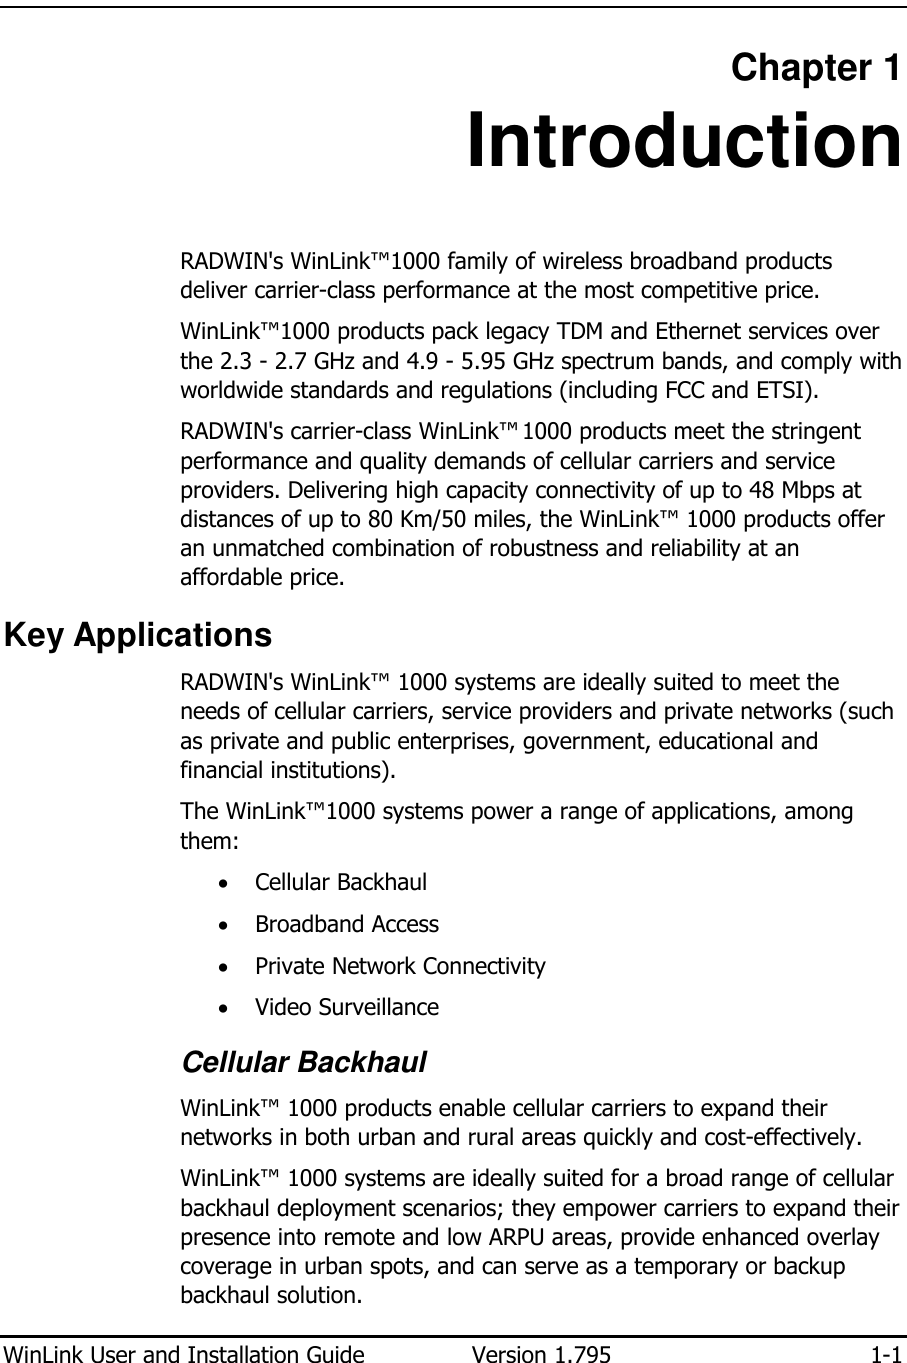  WinLink User and Installation Guide  Version 1.795  1-1  Chapter 1 Introduction RADWIN&apos;s WinLink™1000 family of wireless broadband products deliver carrier-class performance at the most competitive price. WinLink™1000 products pack legacy TDM and Ethernet services over the 2.3 - 2.7 GHz and 4.9 - 5.95 GHz spectrum bands, and comply with worldwide standards and regulations (including FCC and ETSI). RADWIN&apos;s carrier-class WinLink™ 1000 products meet the stringent performance and quality demands of cellular carriers and service providers. Delivering high capacity connectivity of up to 48 Mbps at distances of up to 80 Km/50 miles, the WinLink™ 1000 products offer an unmatched combination of robustness and reliability at an affordable price. Key Applications RADWIN&apos;s WinLink™ 1000 systems are ideally suited to meet the needs of cellular carriers, service providers and private networks (such as private and public enterprises, government, educational and financial institutions).  The WinLink™1000 systems power a range of applications, among them:  • Cellular Backhaul • Broadband Access • Private Network Connectivity • Video Surveillance Cellular Backhaul WinLink™ 1000 products enable cellular carriers to expand their networks in both urban and rural areas quickly and cost-effectively.  WinLink™ 1000 systems are ideally suited for a broad range of cellular backhaul deployment scenarios; they empower carriers to expand their presence into remote and low ARPU areas, provide enhanced overlay coverage in urban spots, and can serve as a temporary or backup backhaul solution.  